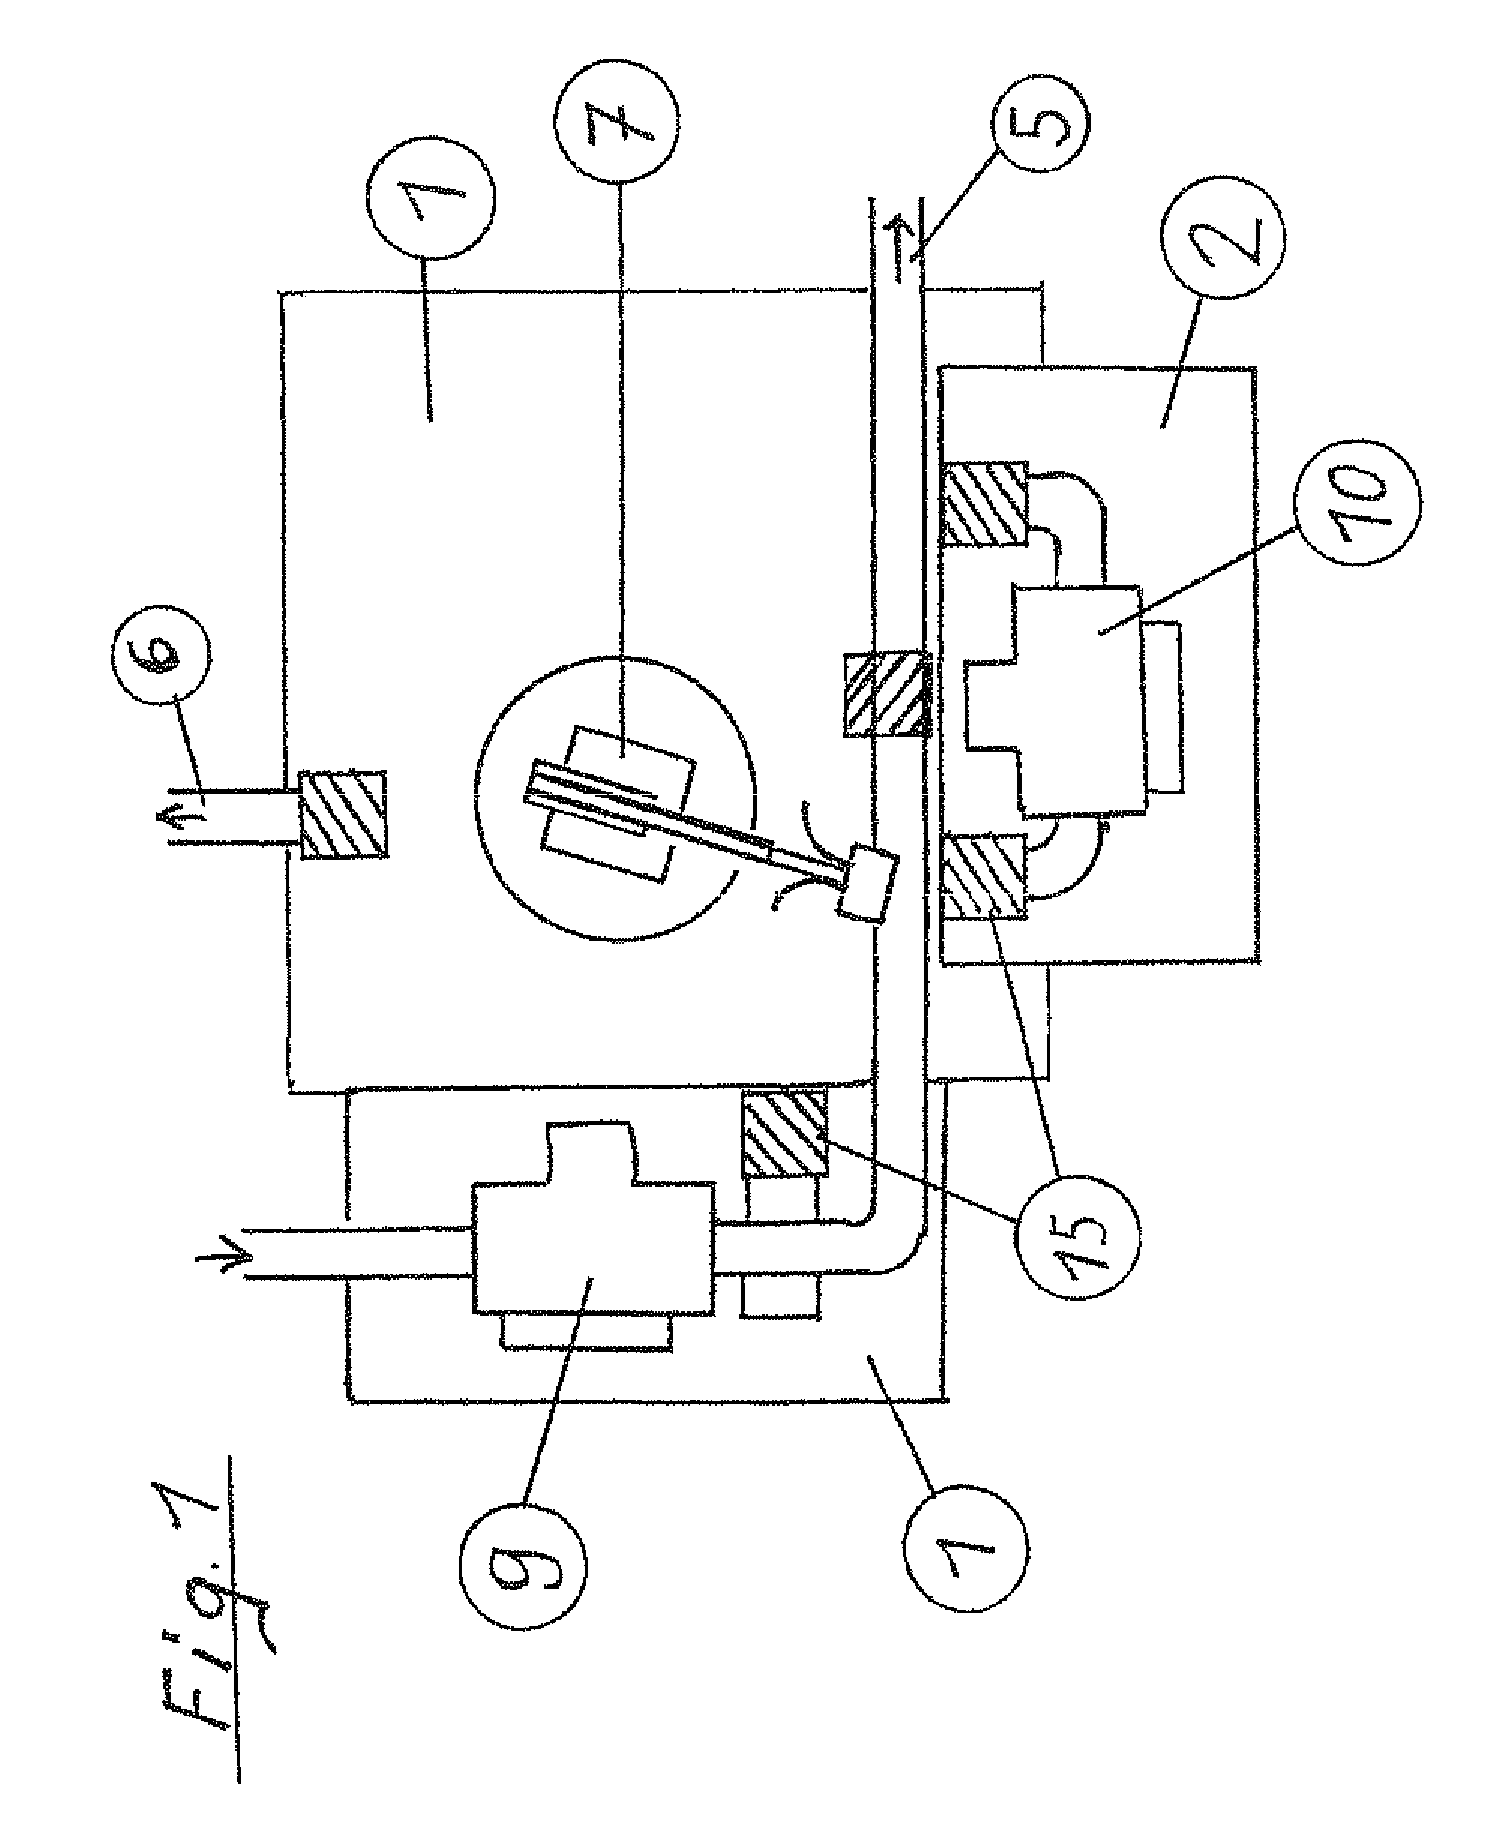 Device and method for detecting and neutralizing hazardous goods